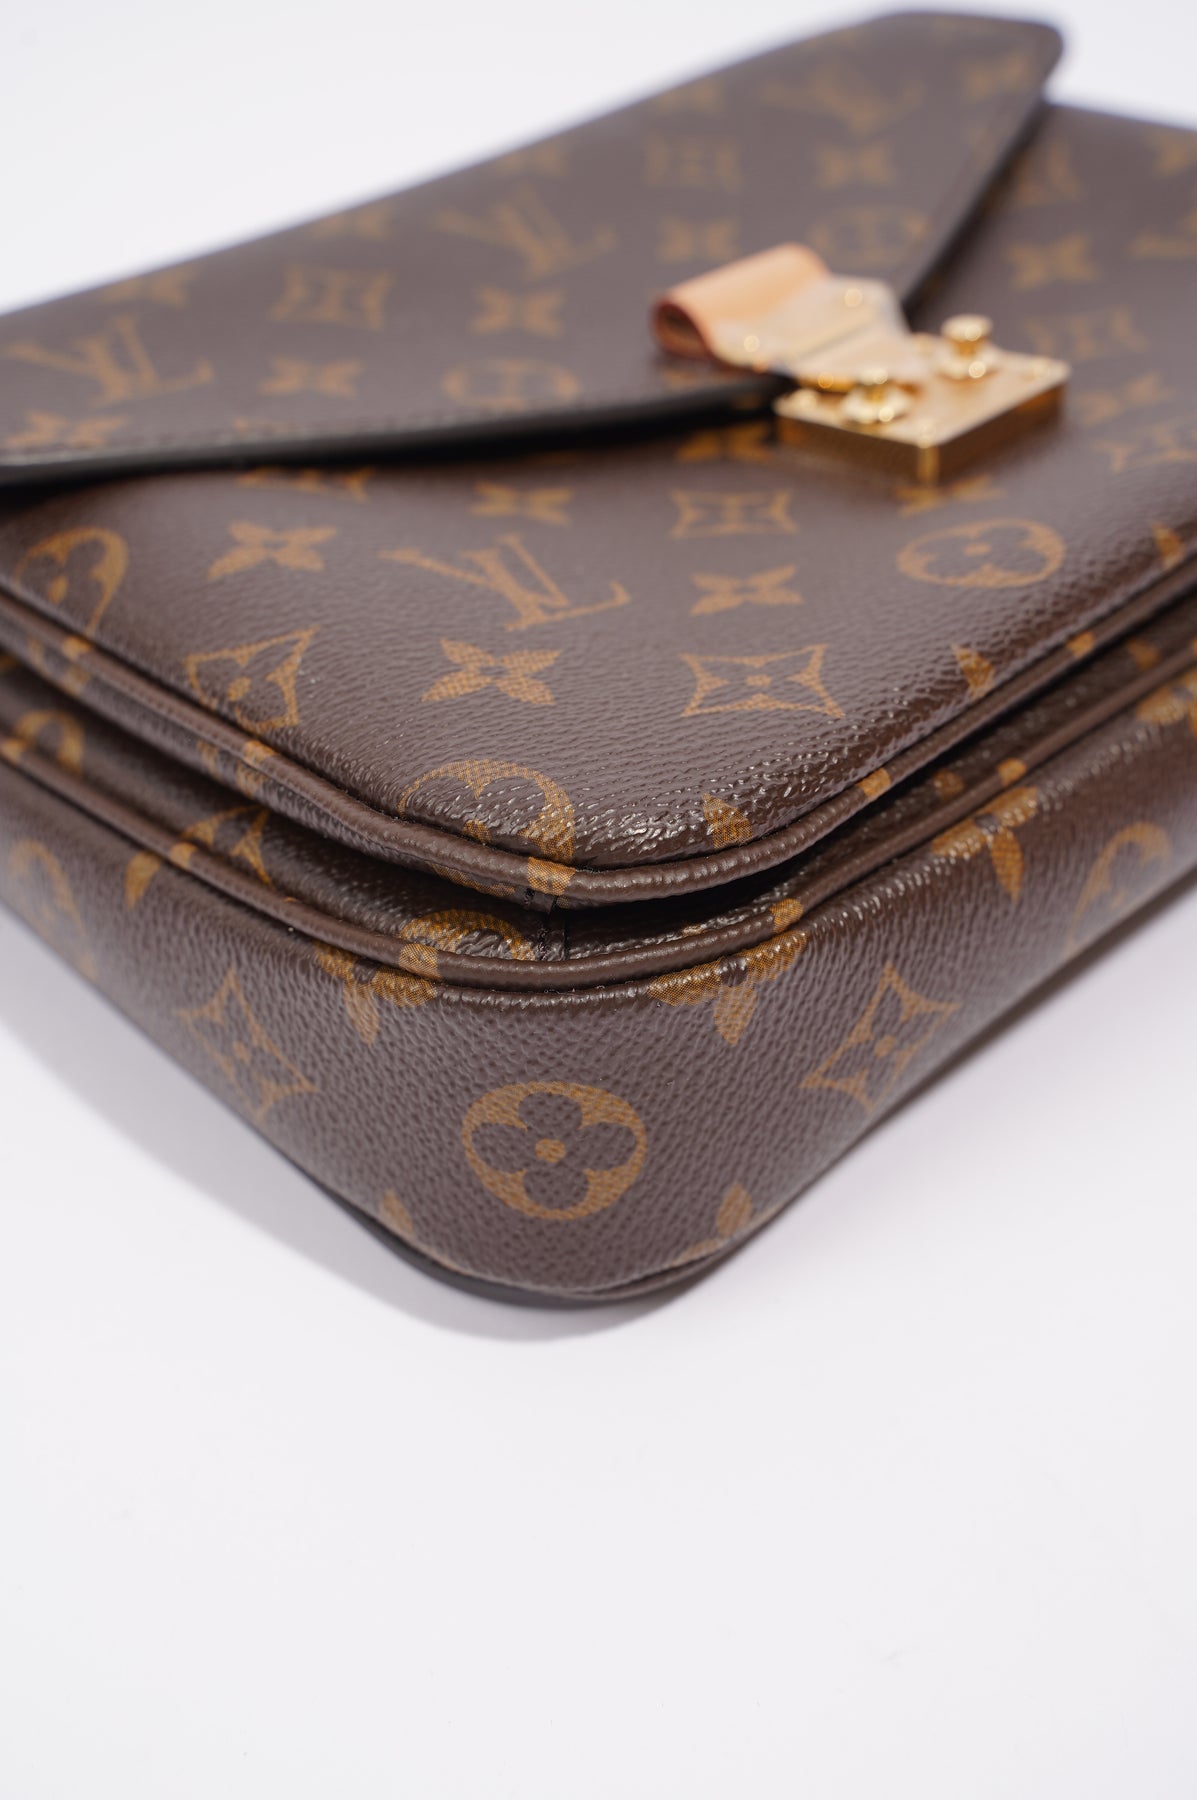 LOUIS VUITTON Monogram Metis Available in January 2013